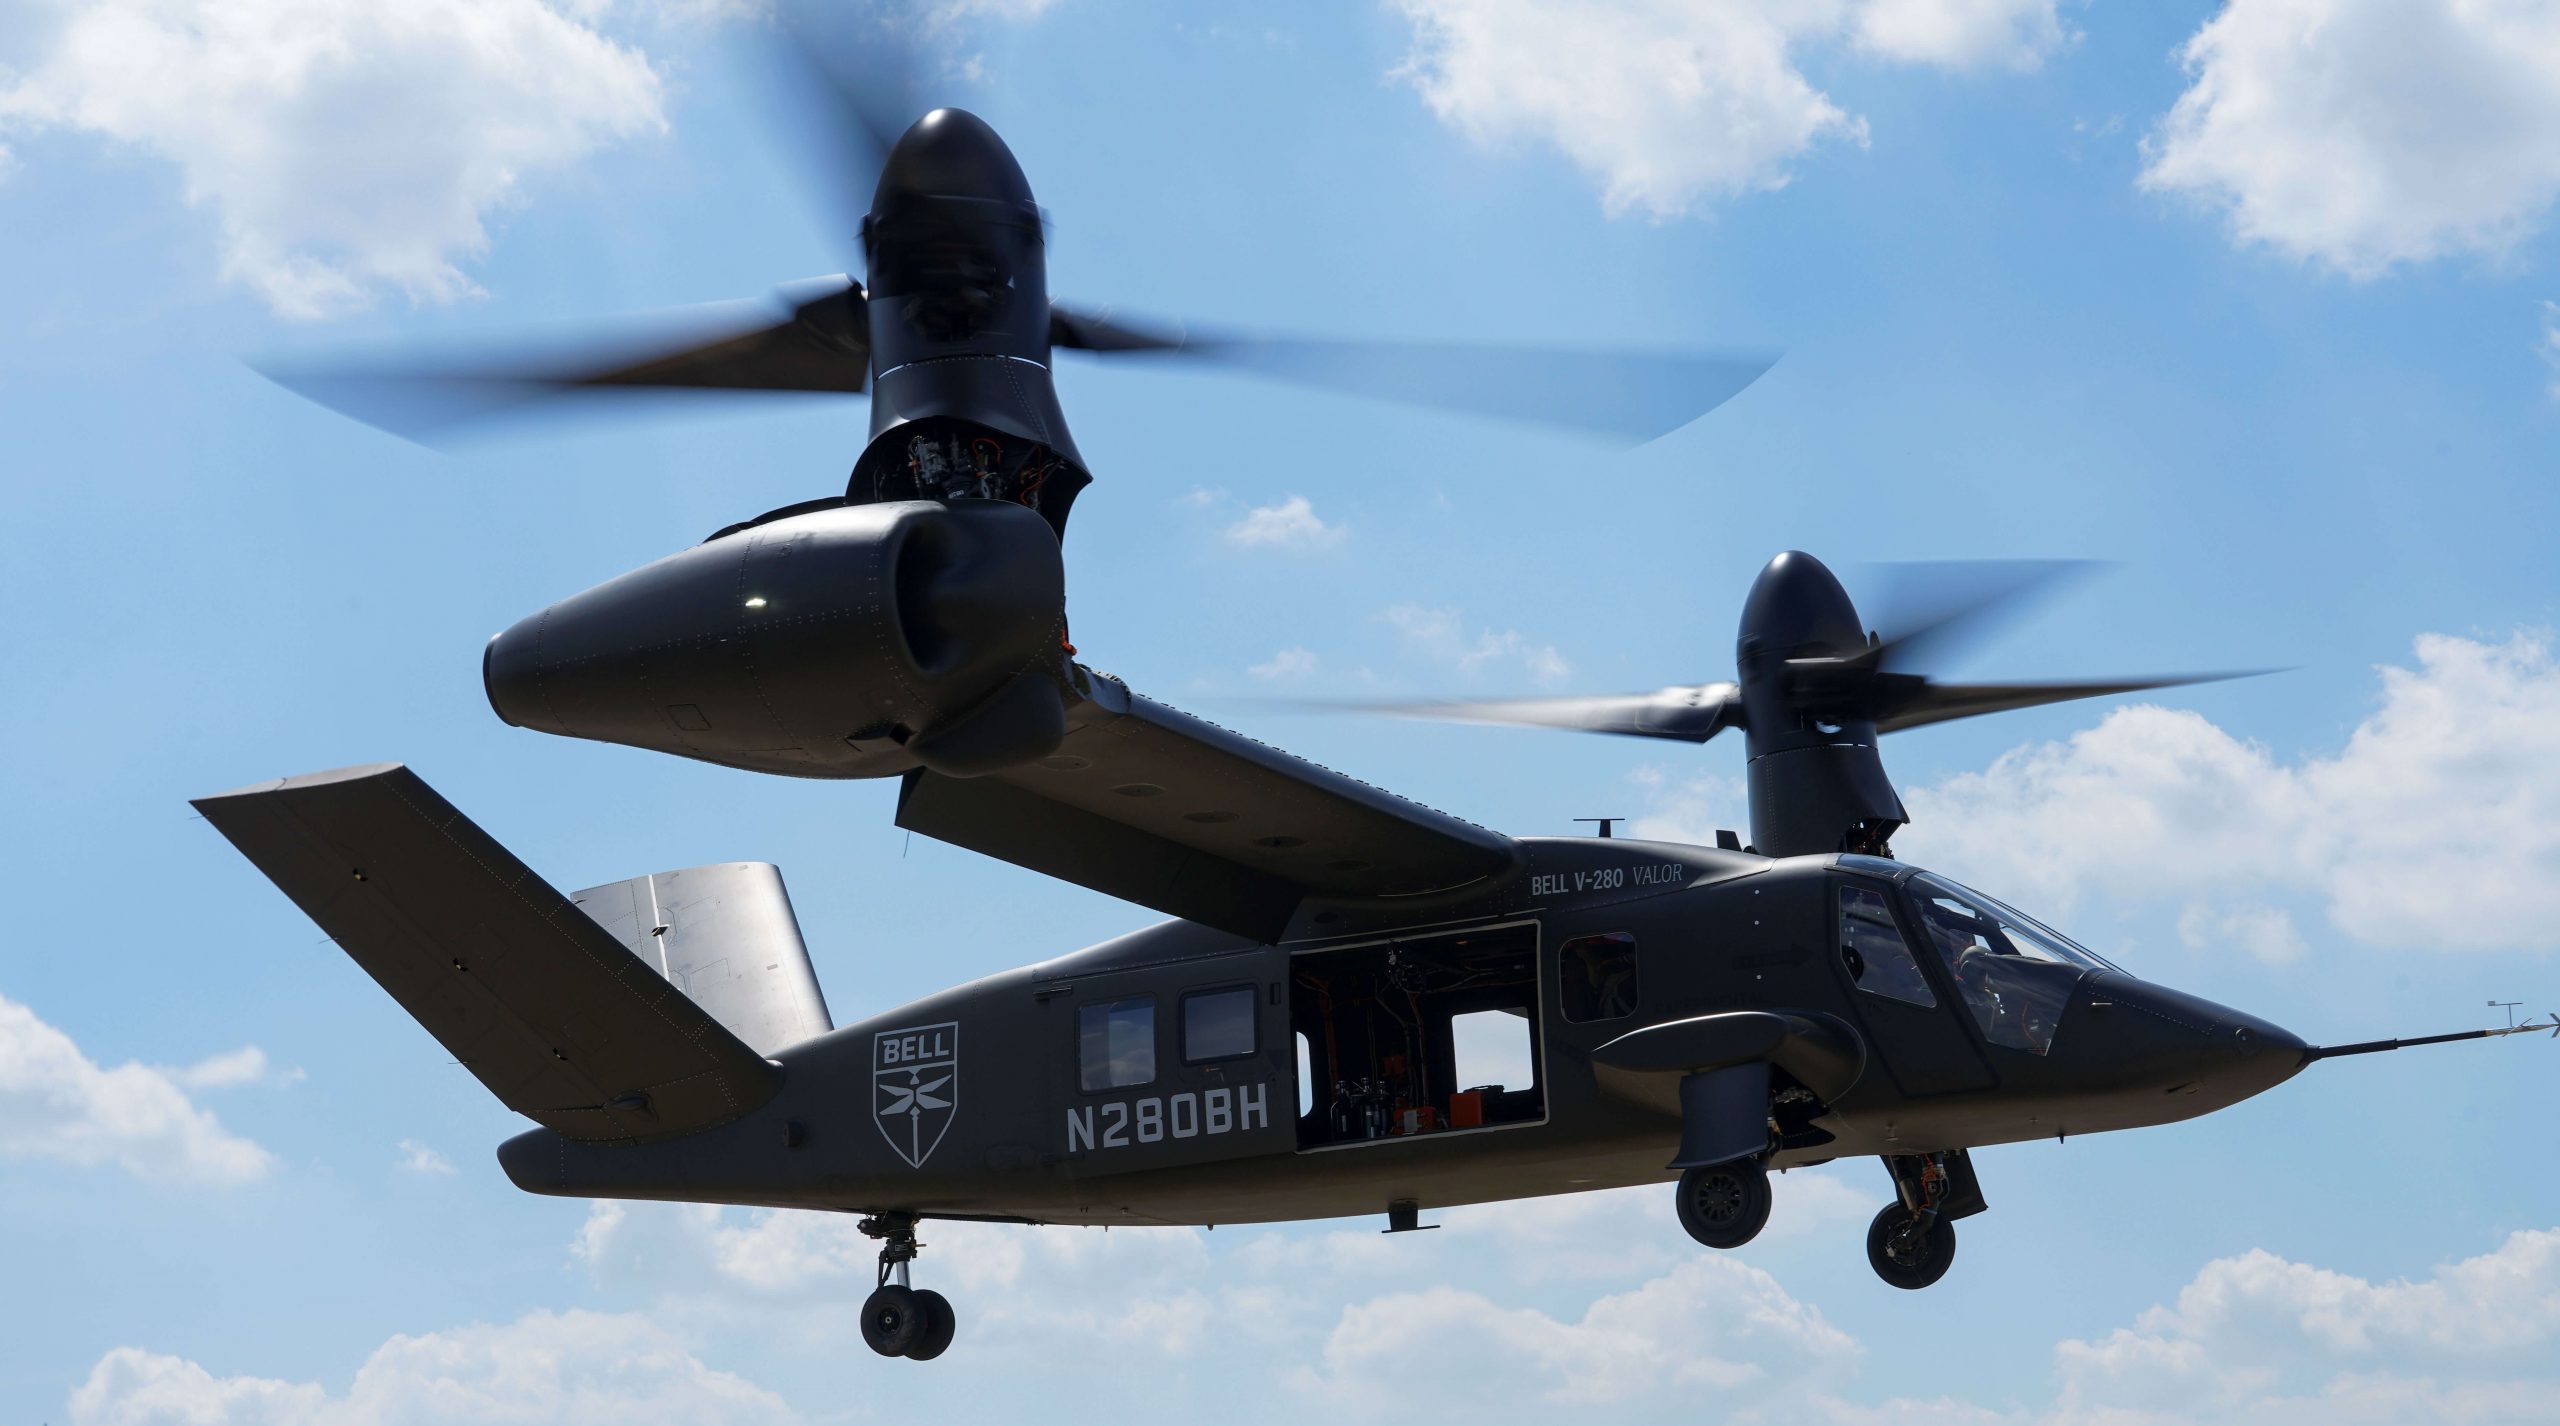 GKN Aerospace delivers thermoplastic composite components for Bell V-280 Valor